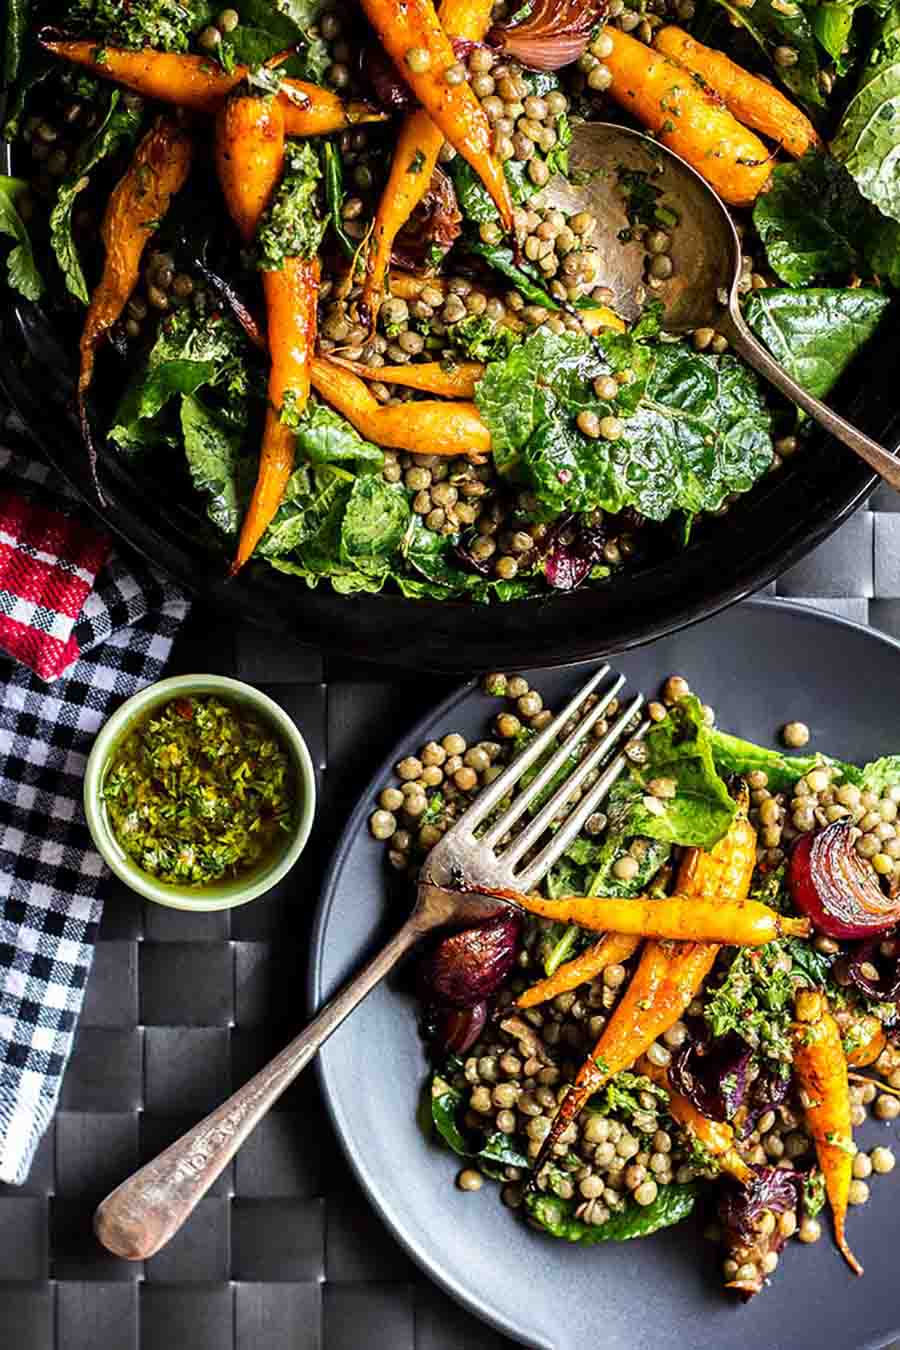 Lentil salad with roasted vegetables sitting in a serving dish with a single serving portion in front.